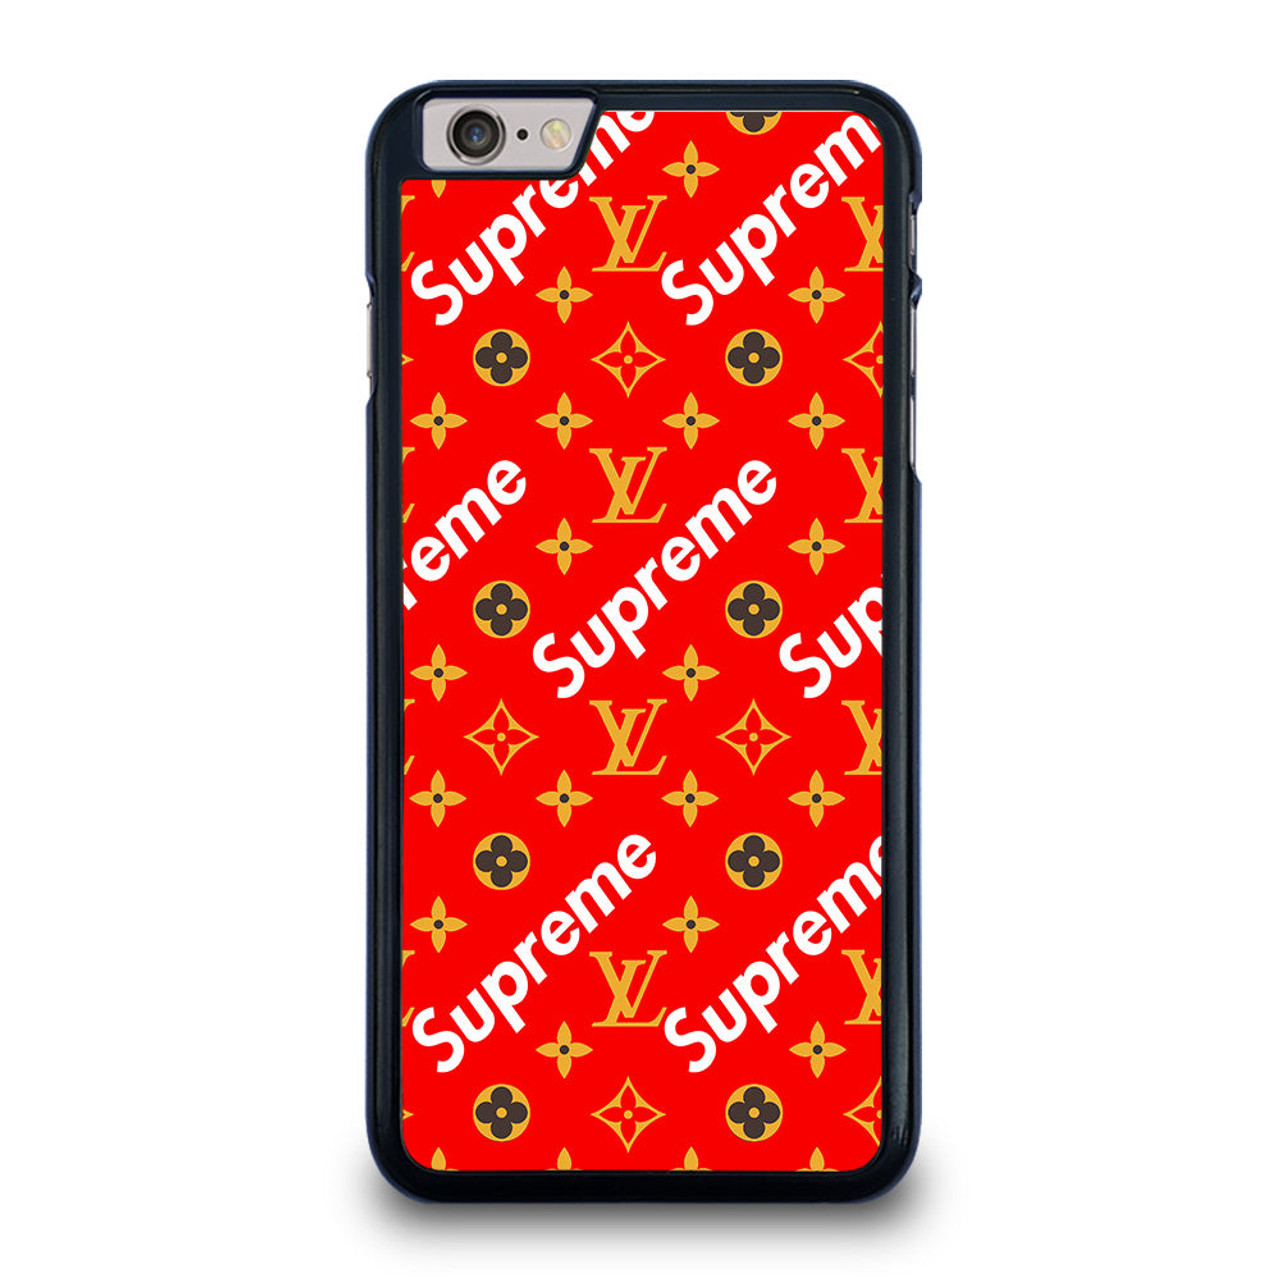 NEW SUPREME RED GOLD PATTERN iPhone 6 / 6S Plus Case Cover